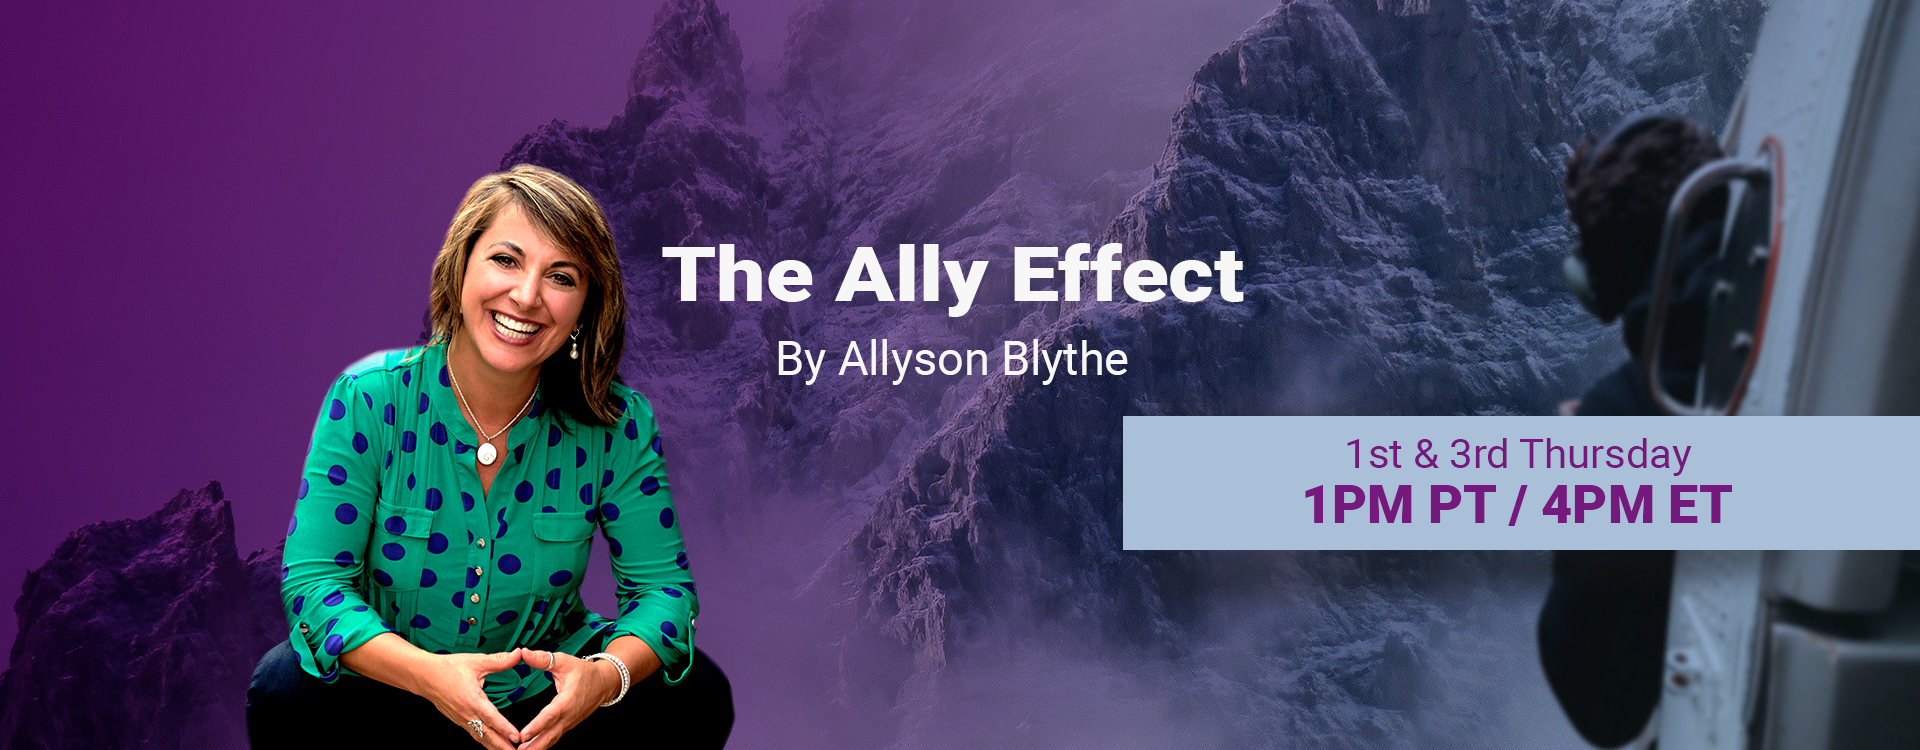 The Ally Effect